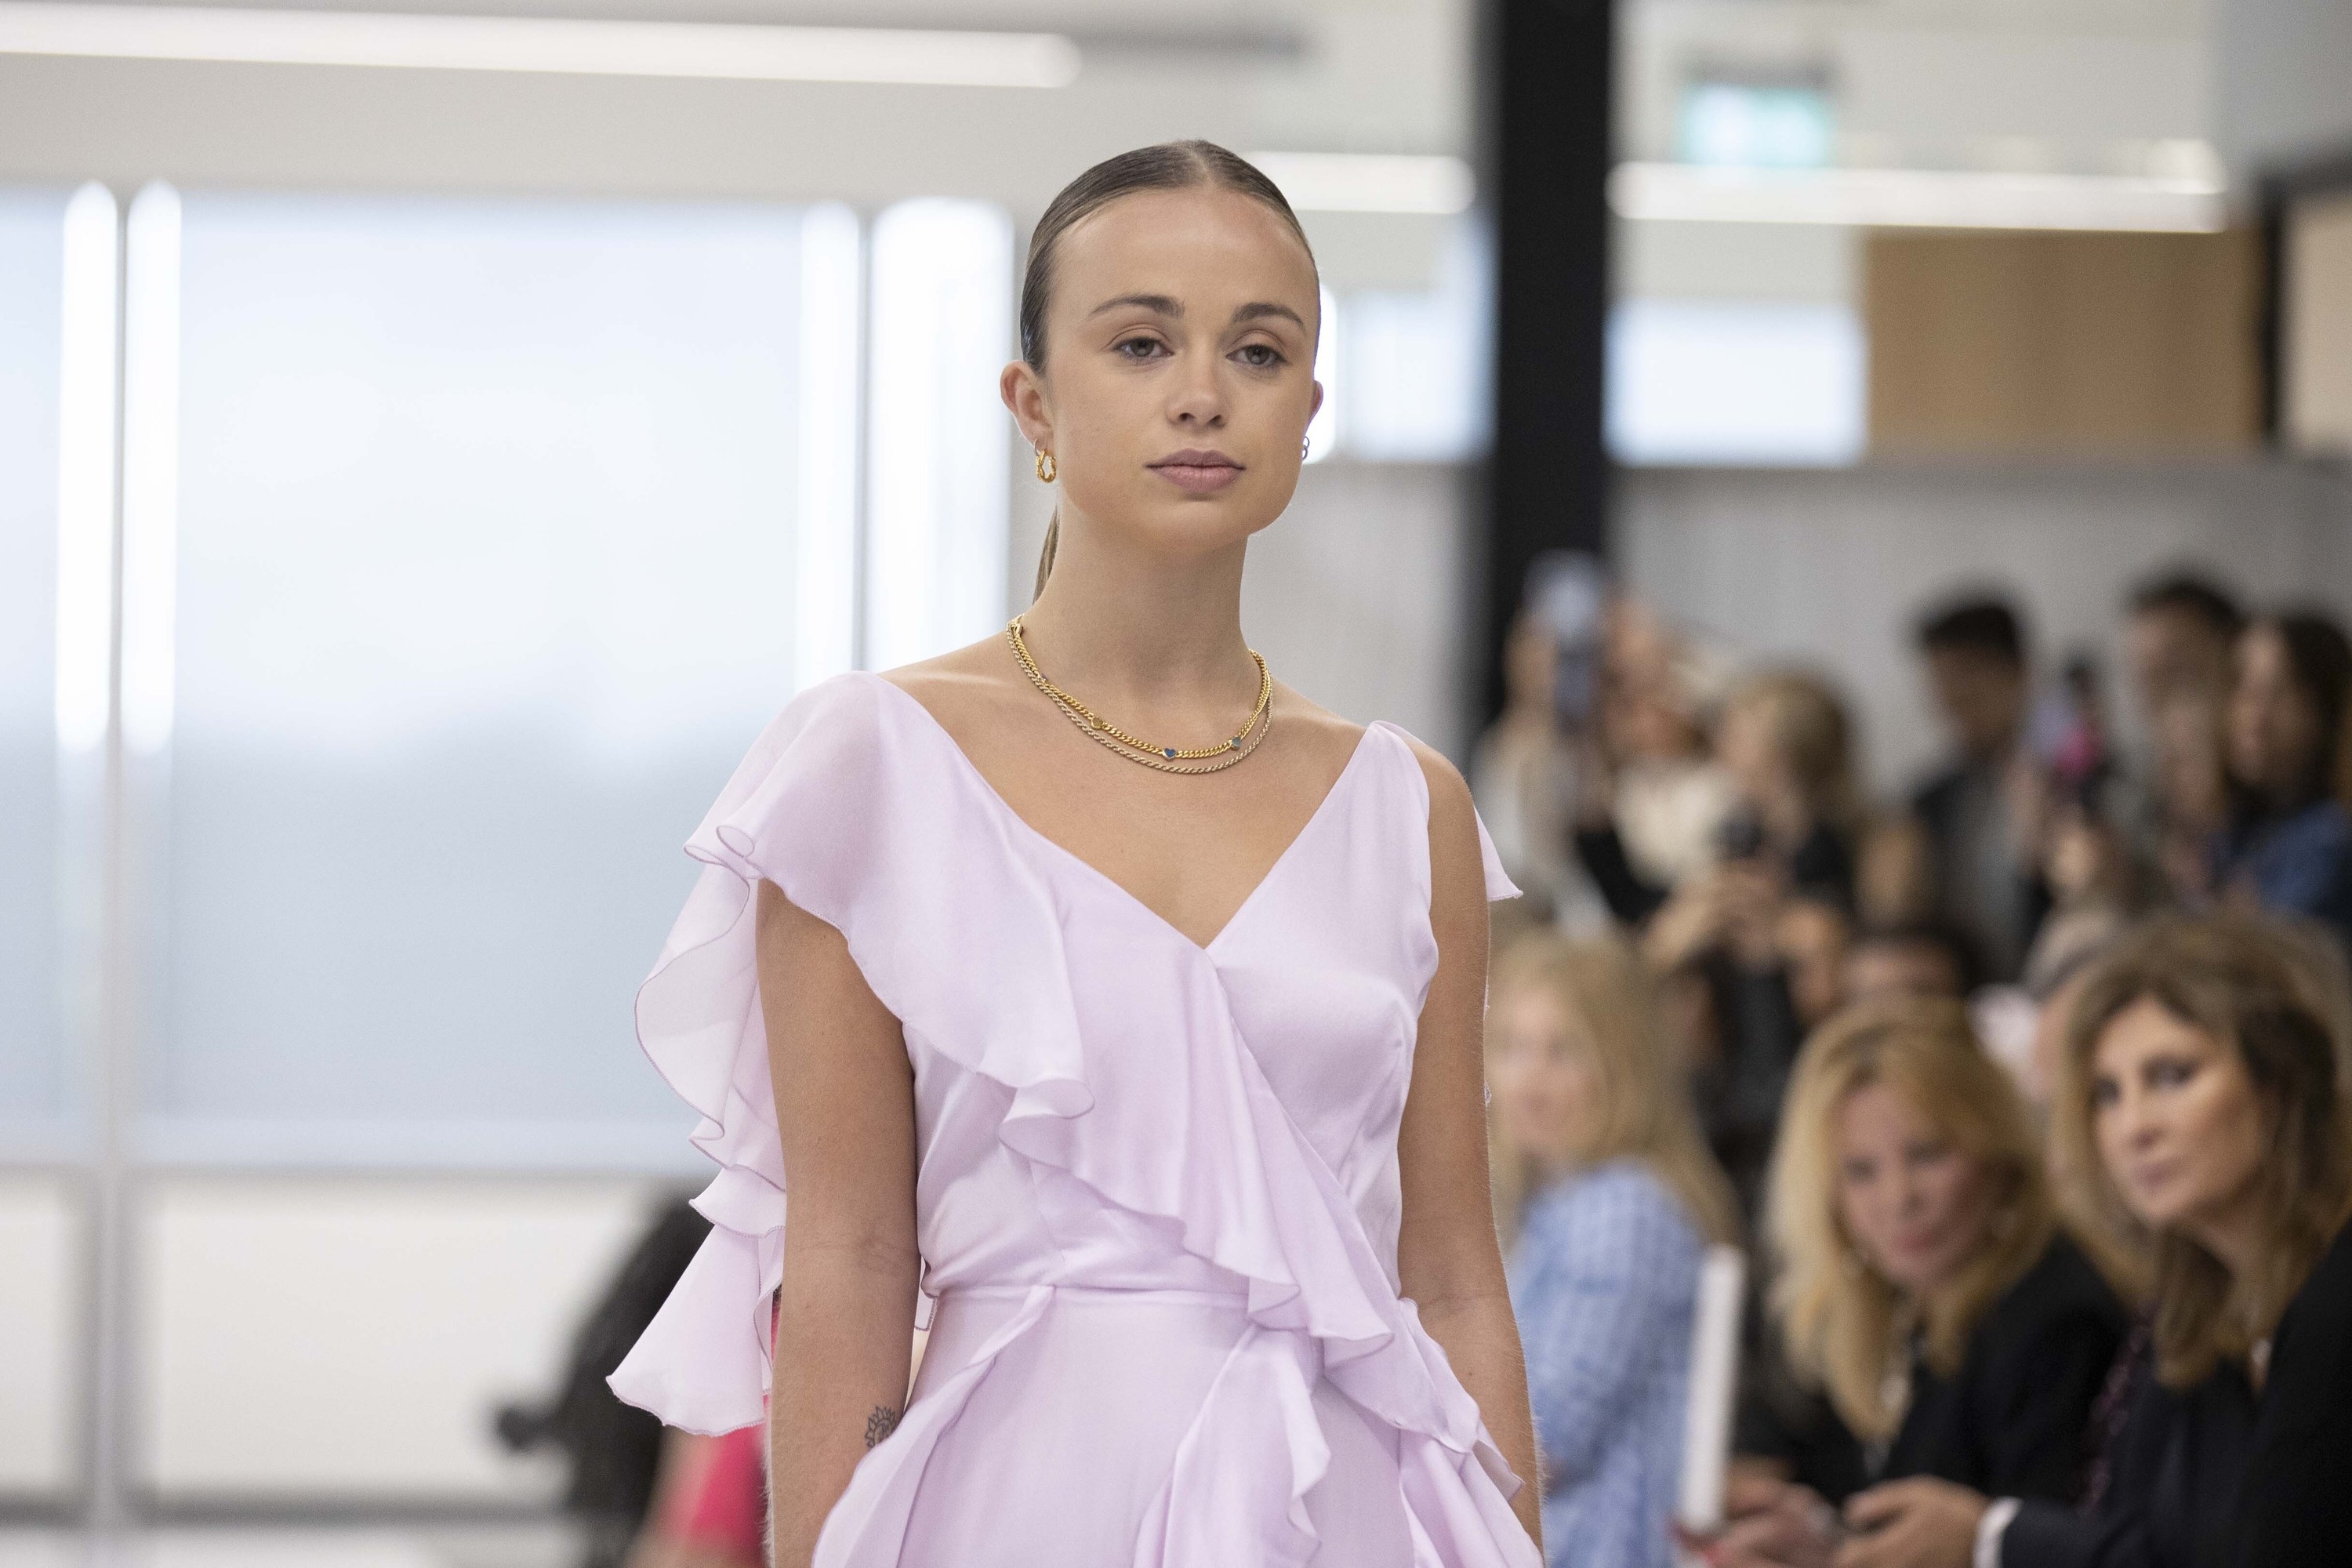 Lady Amelia Windsor, granddaughter of Prince Edward presents Spring/Summer creation by Turkish fashion designer Zeynep Kartal as part of the cooperation with LF Fashion in London, United Kingdom on September 27, 2022